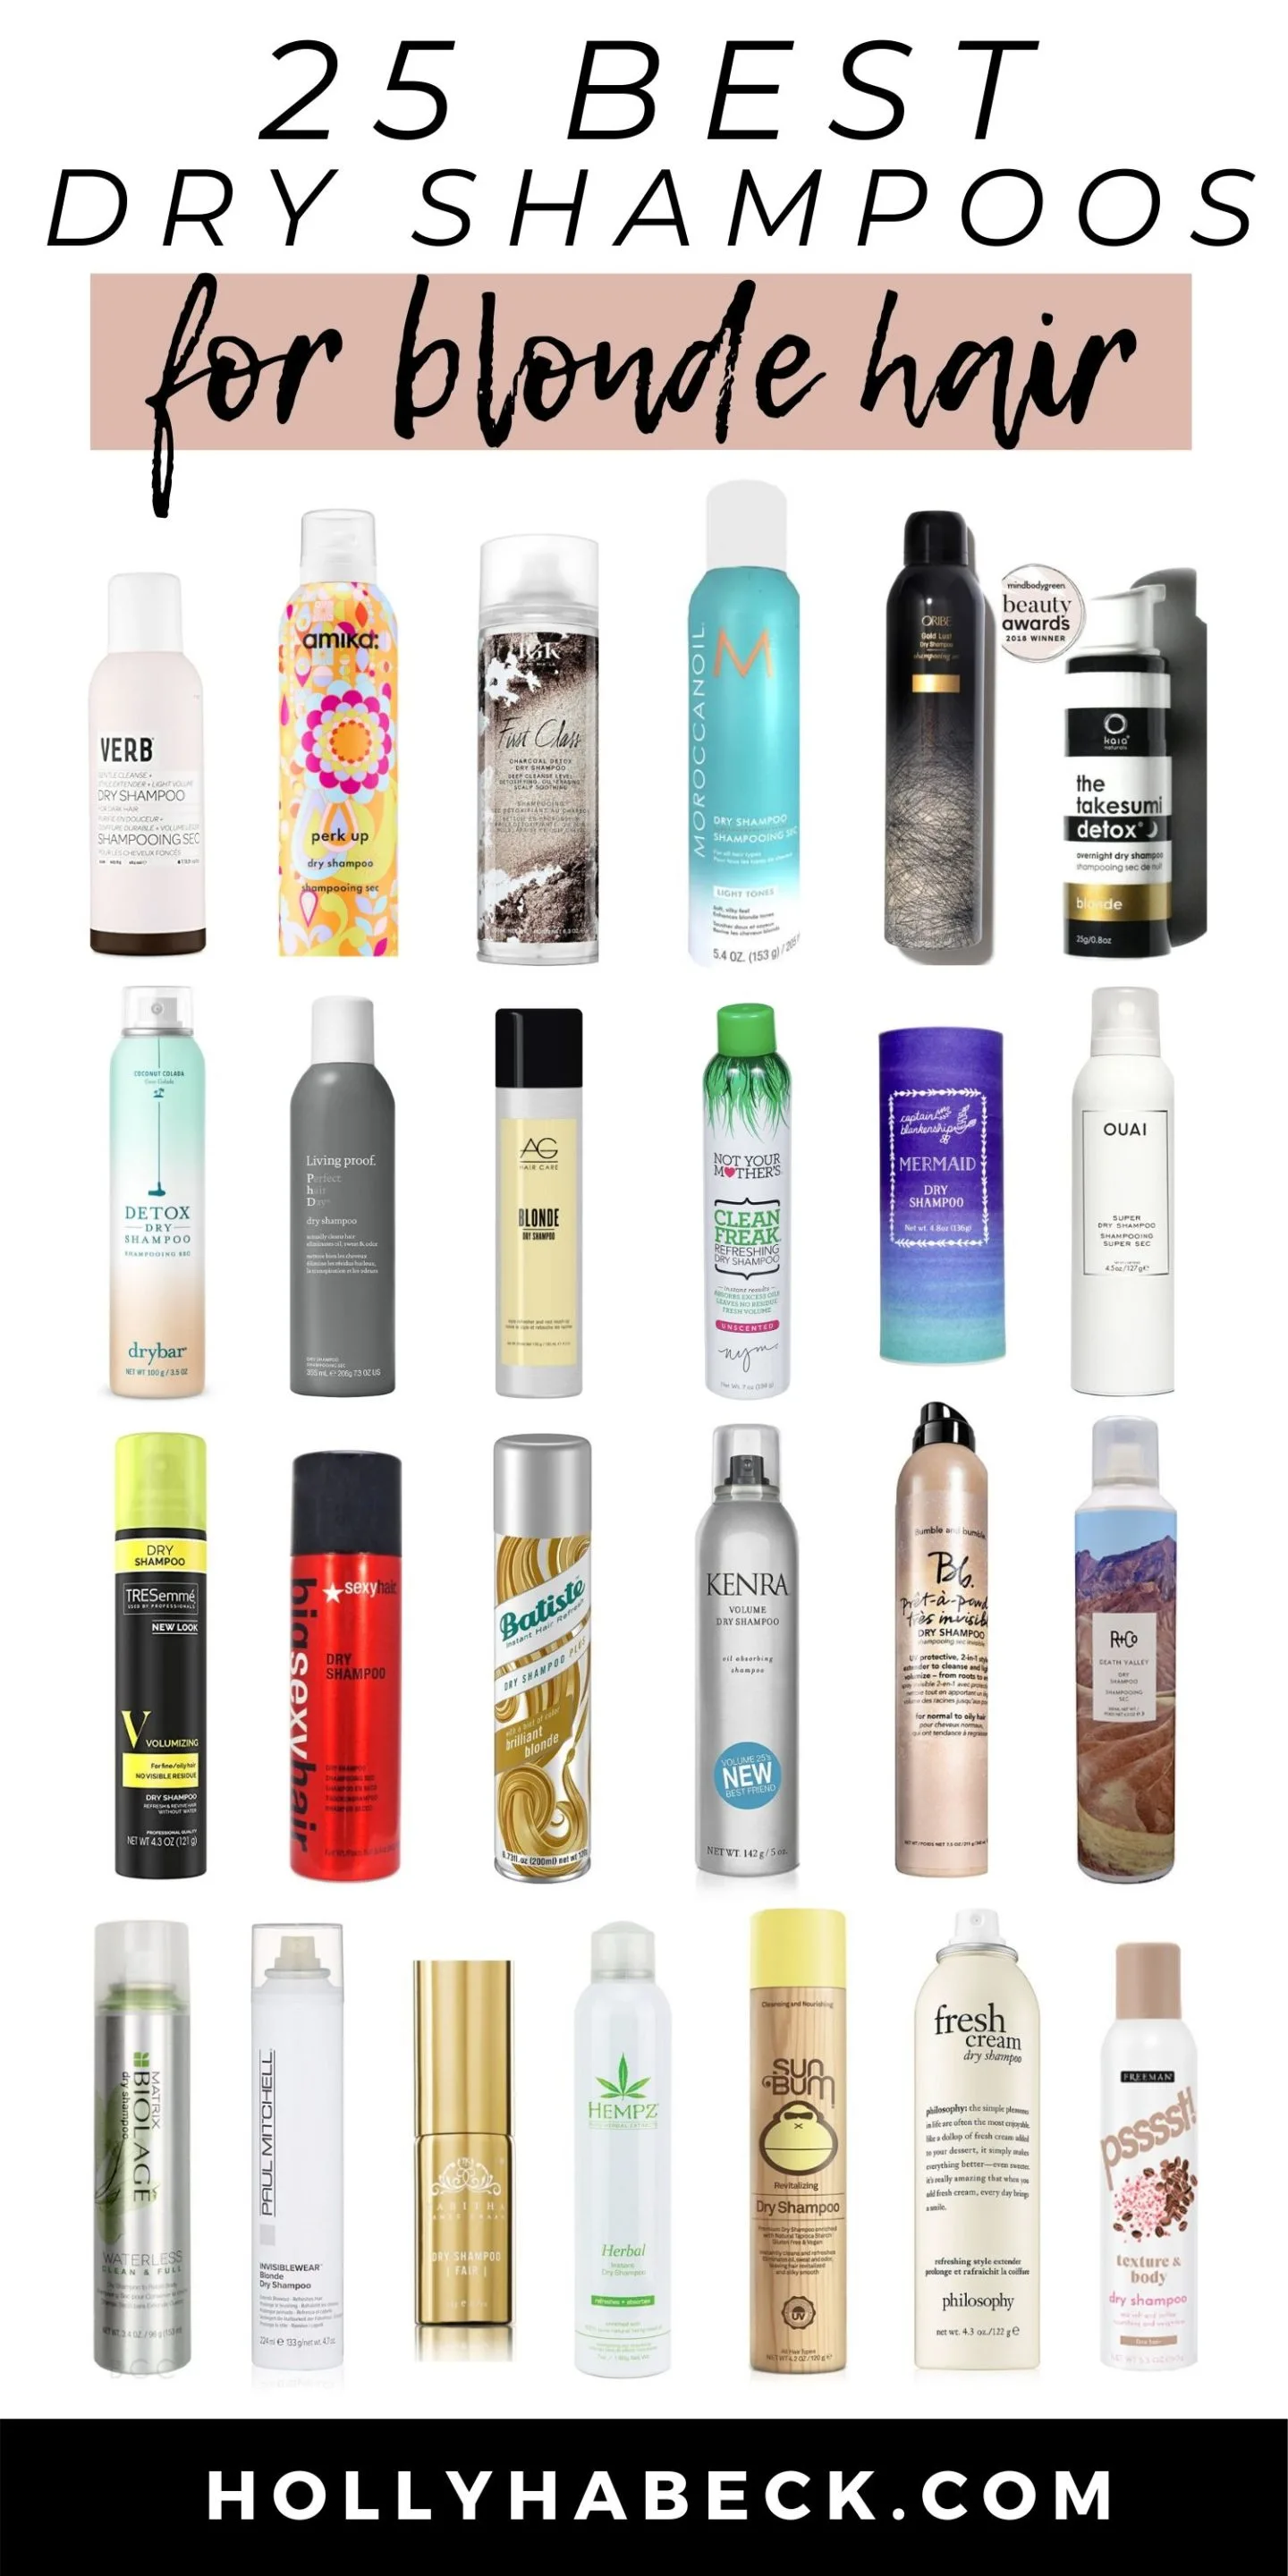 25 Best Dry Shampoos for Blonde Hair - Holly Habeck